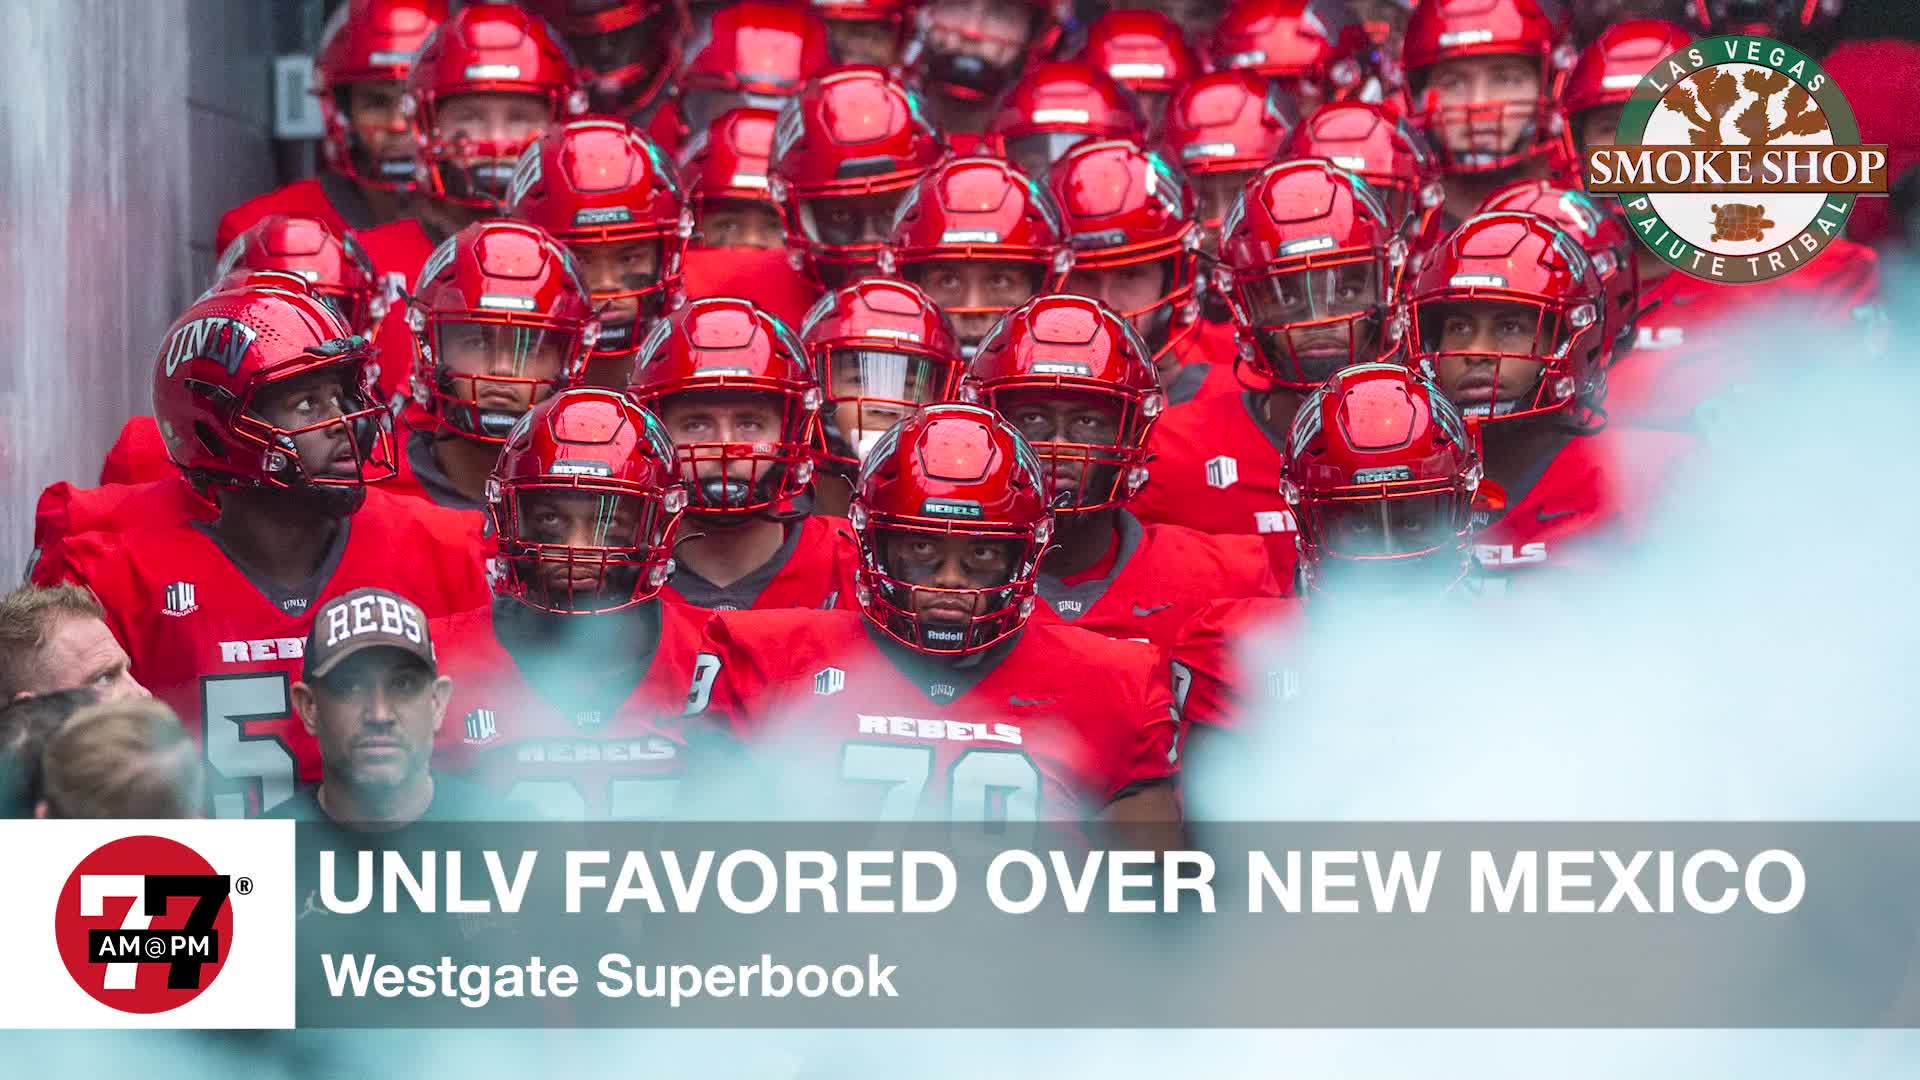 UNLV favored over New Mexico